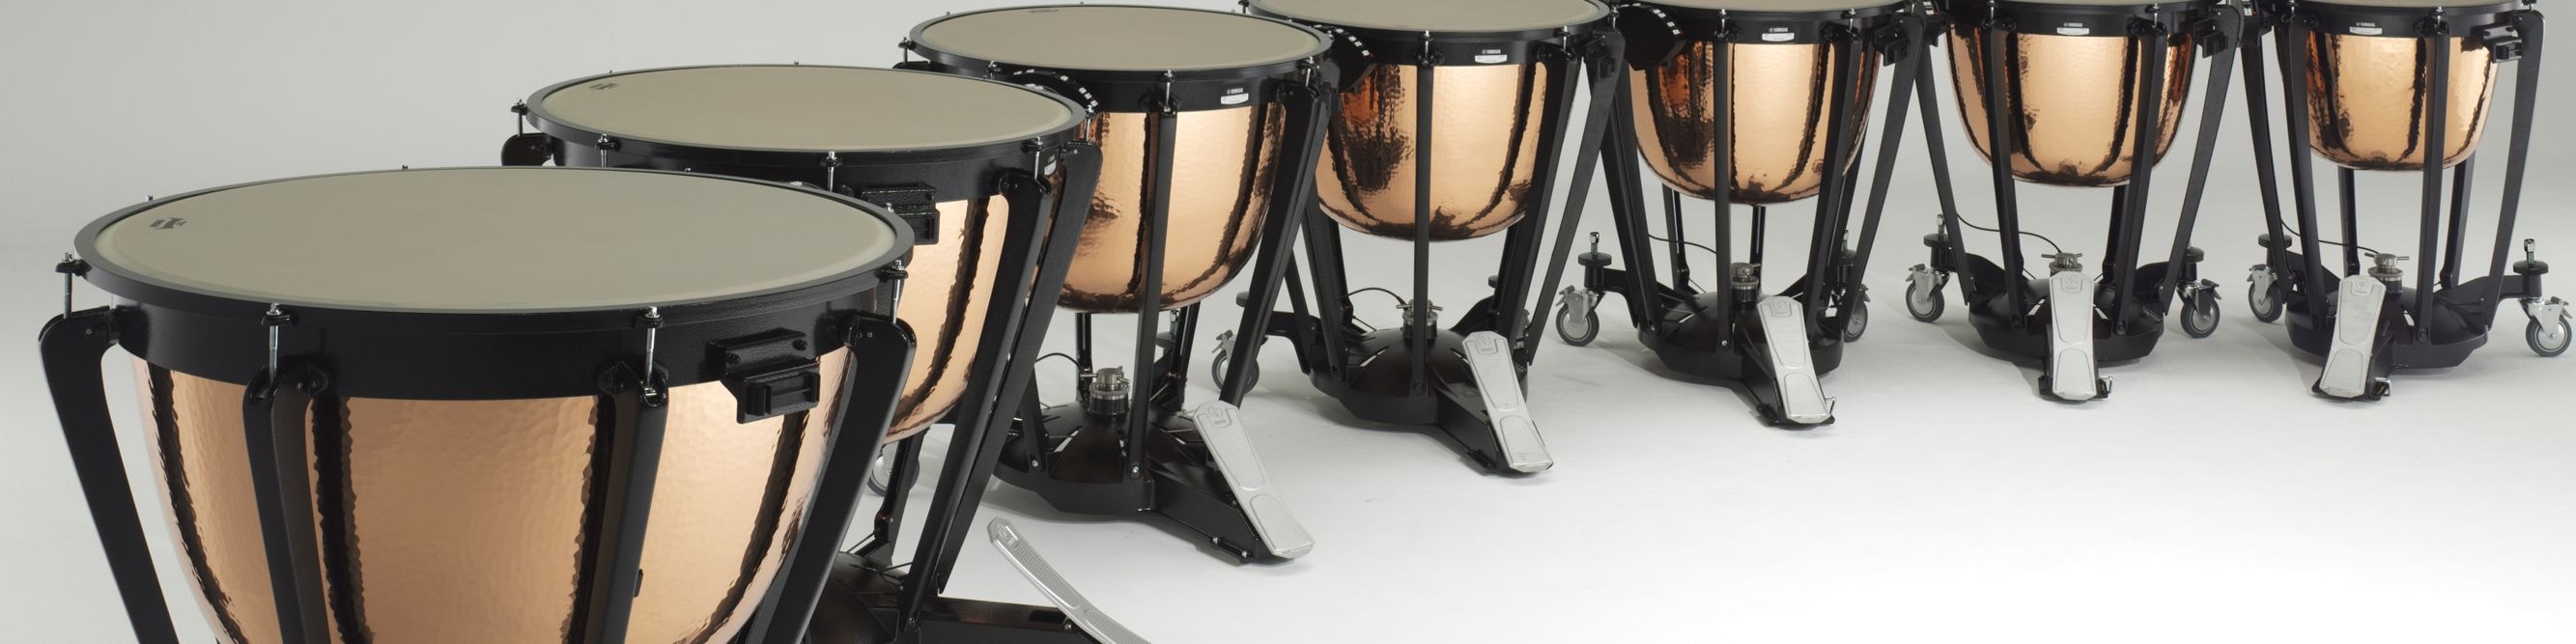 A Maintenance Guide for Timpani for Non-Timpanists 